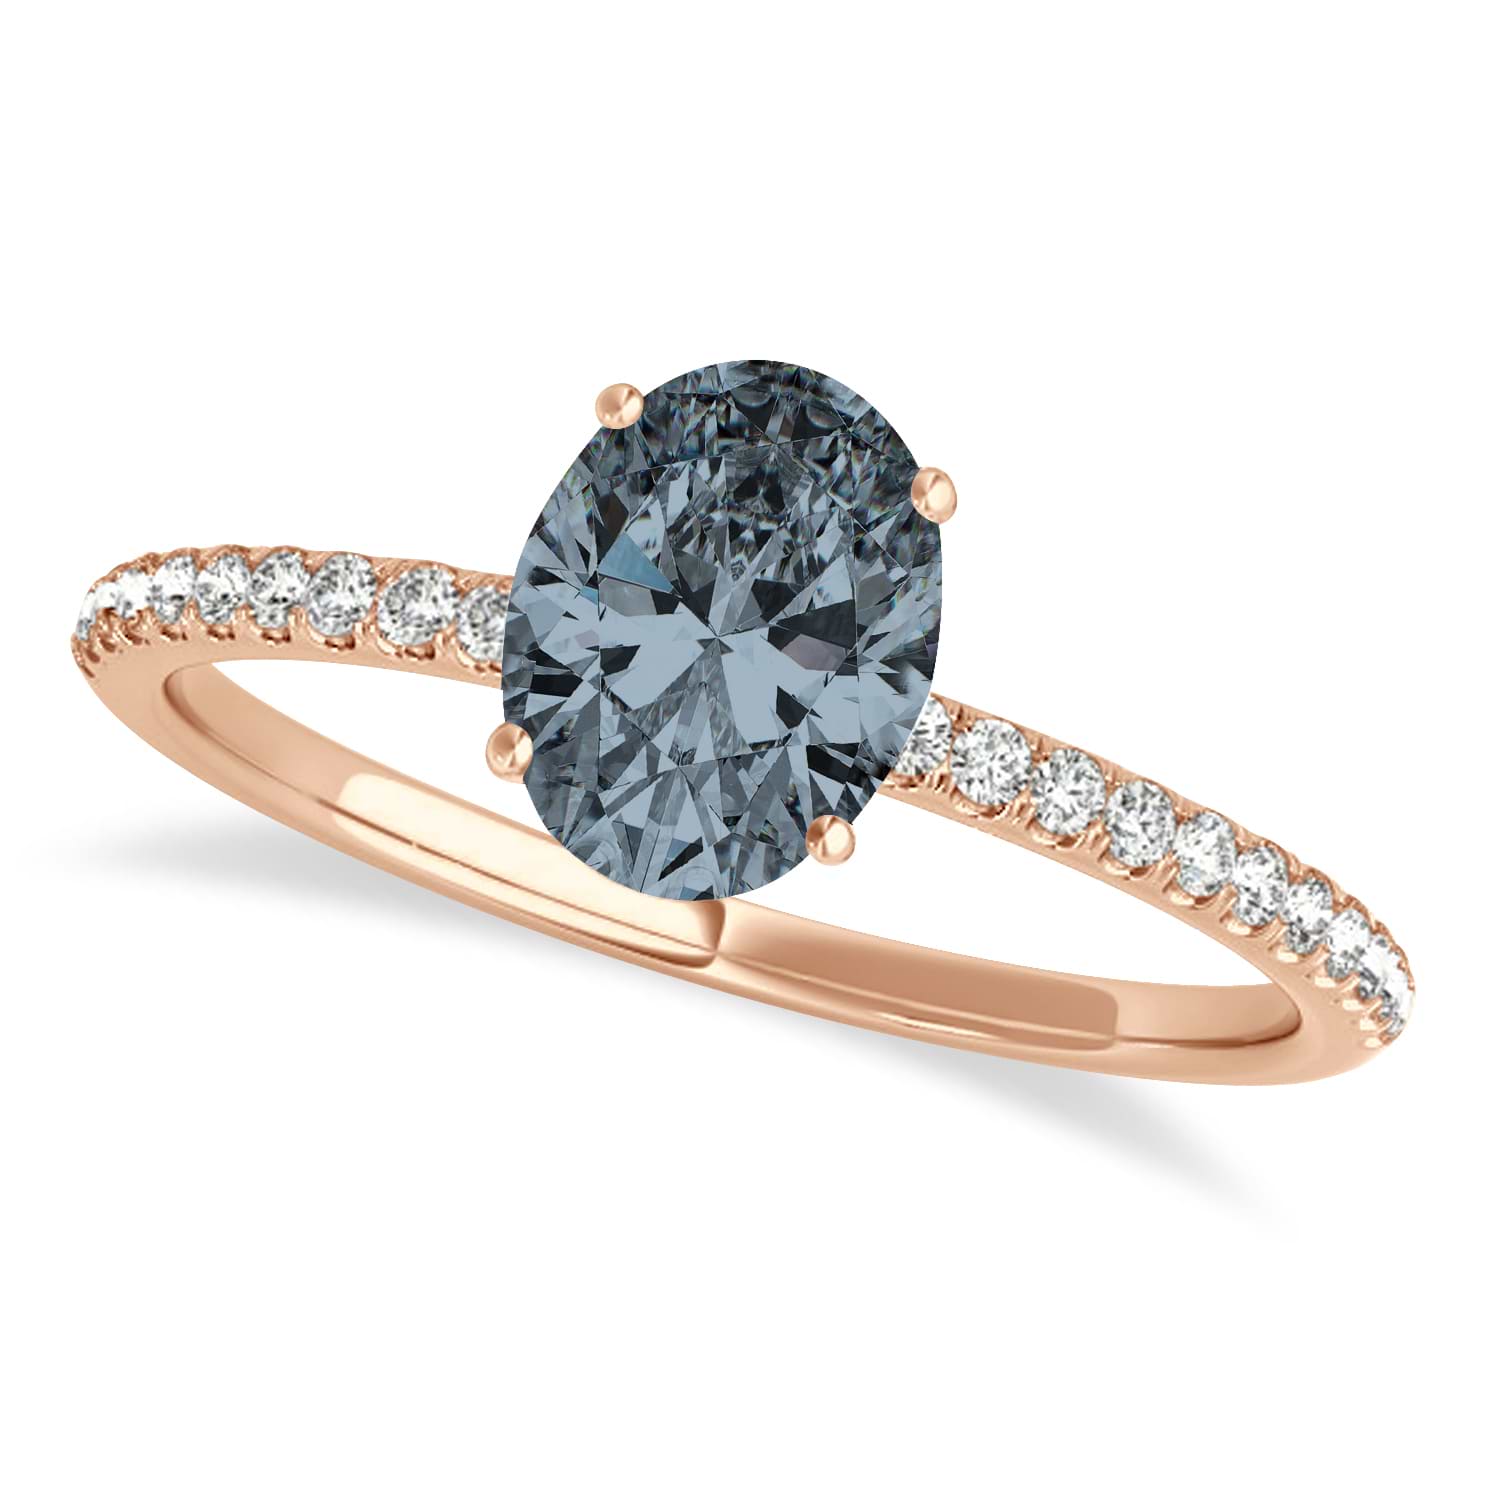 Gray Spinel & Diamond Accented Oval Shape Engagement Ring 14k Rose Gold (1.00ct)